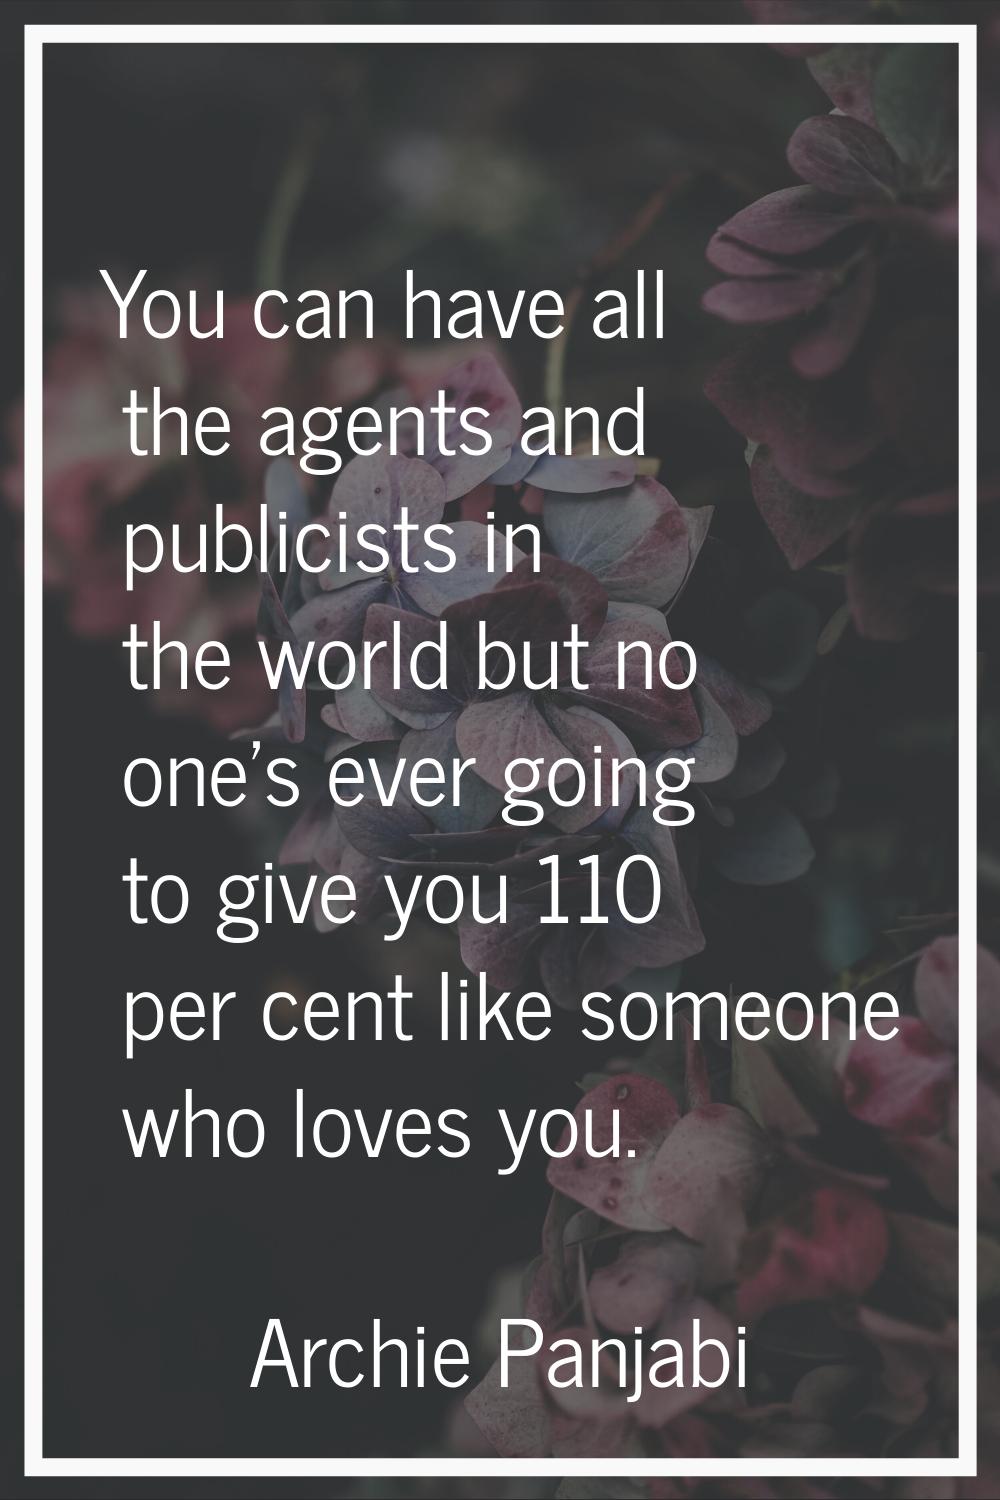 You can have all the agents and publicists in the world but no one's ever going to give you 110 per